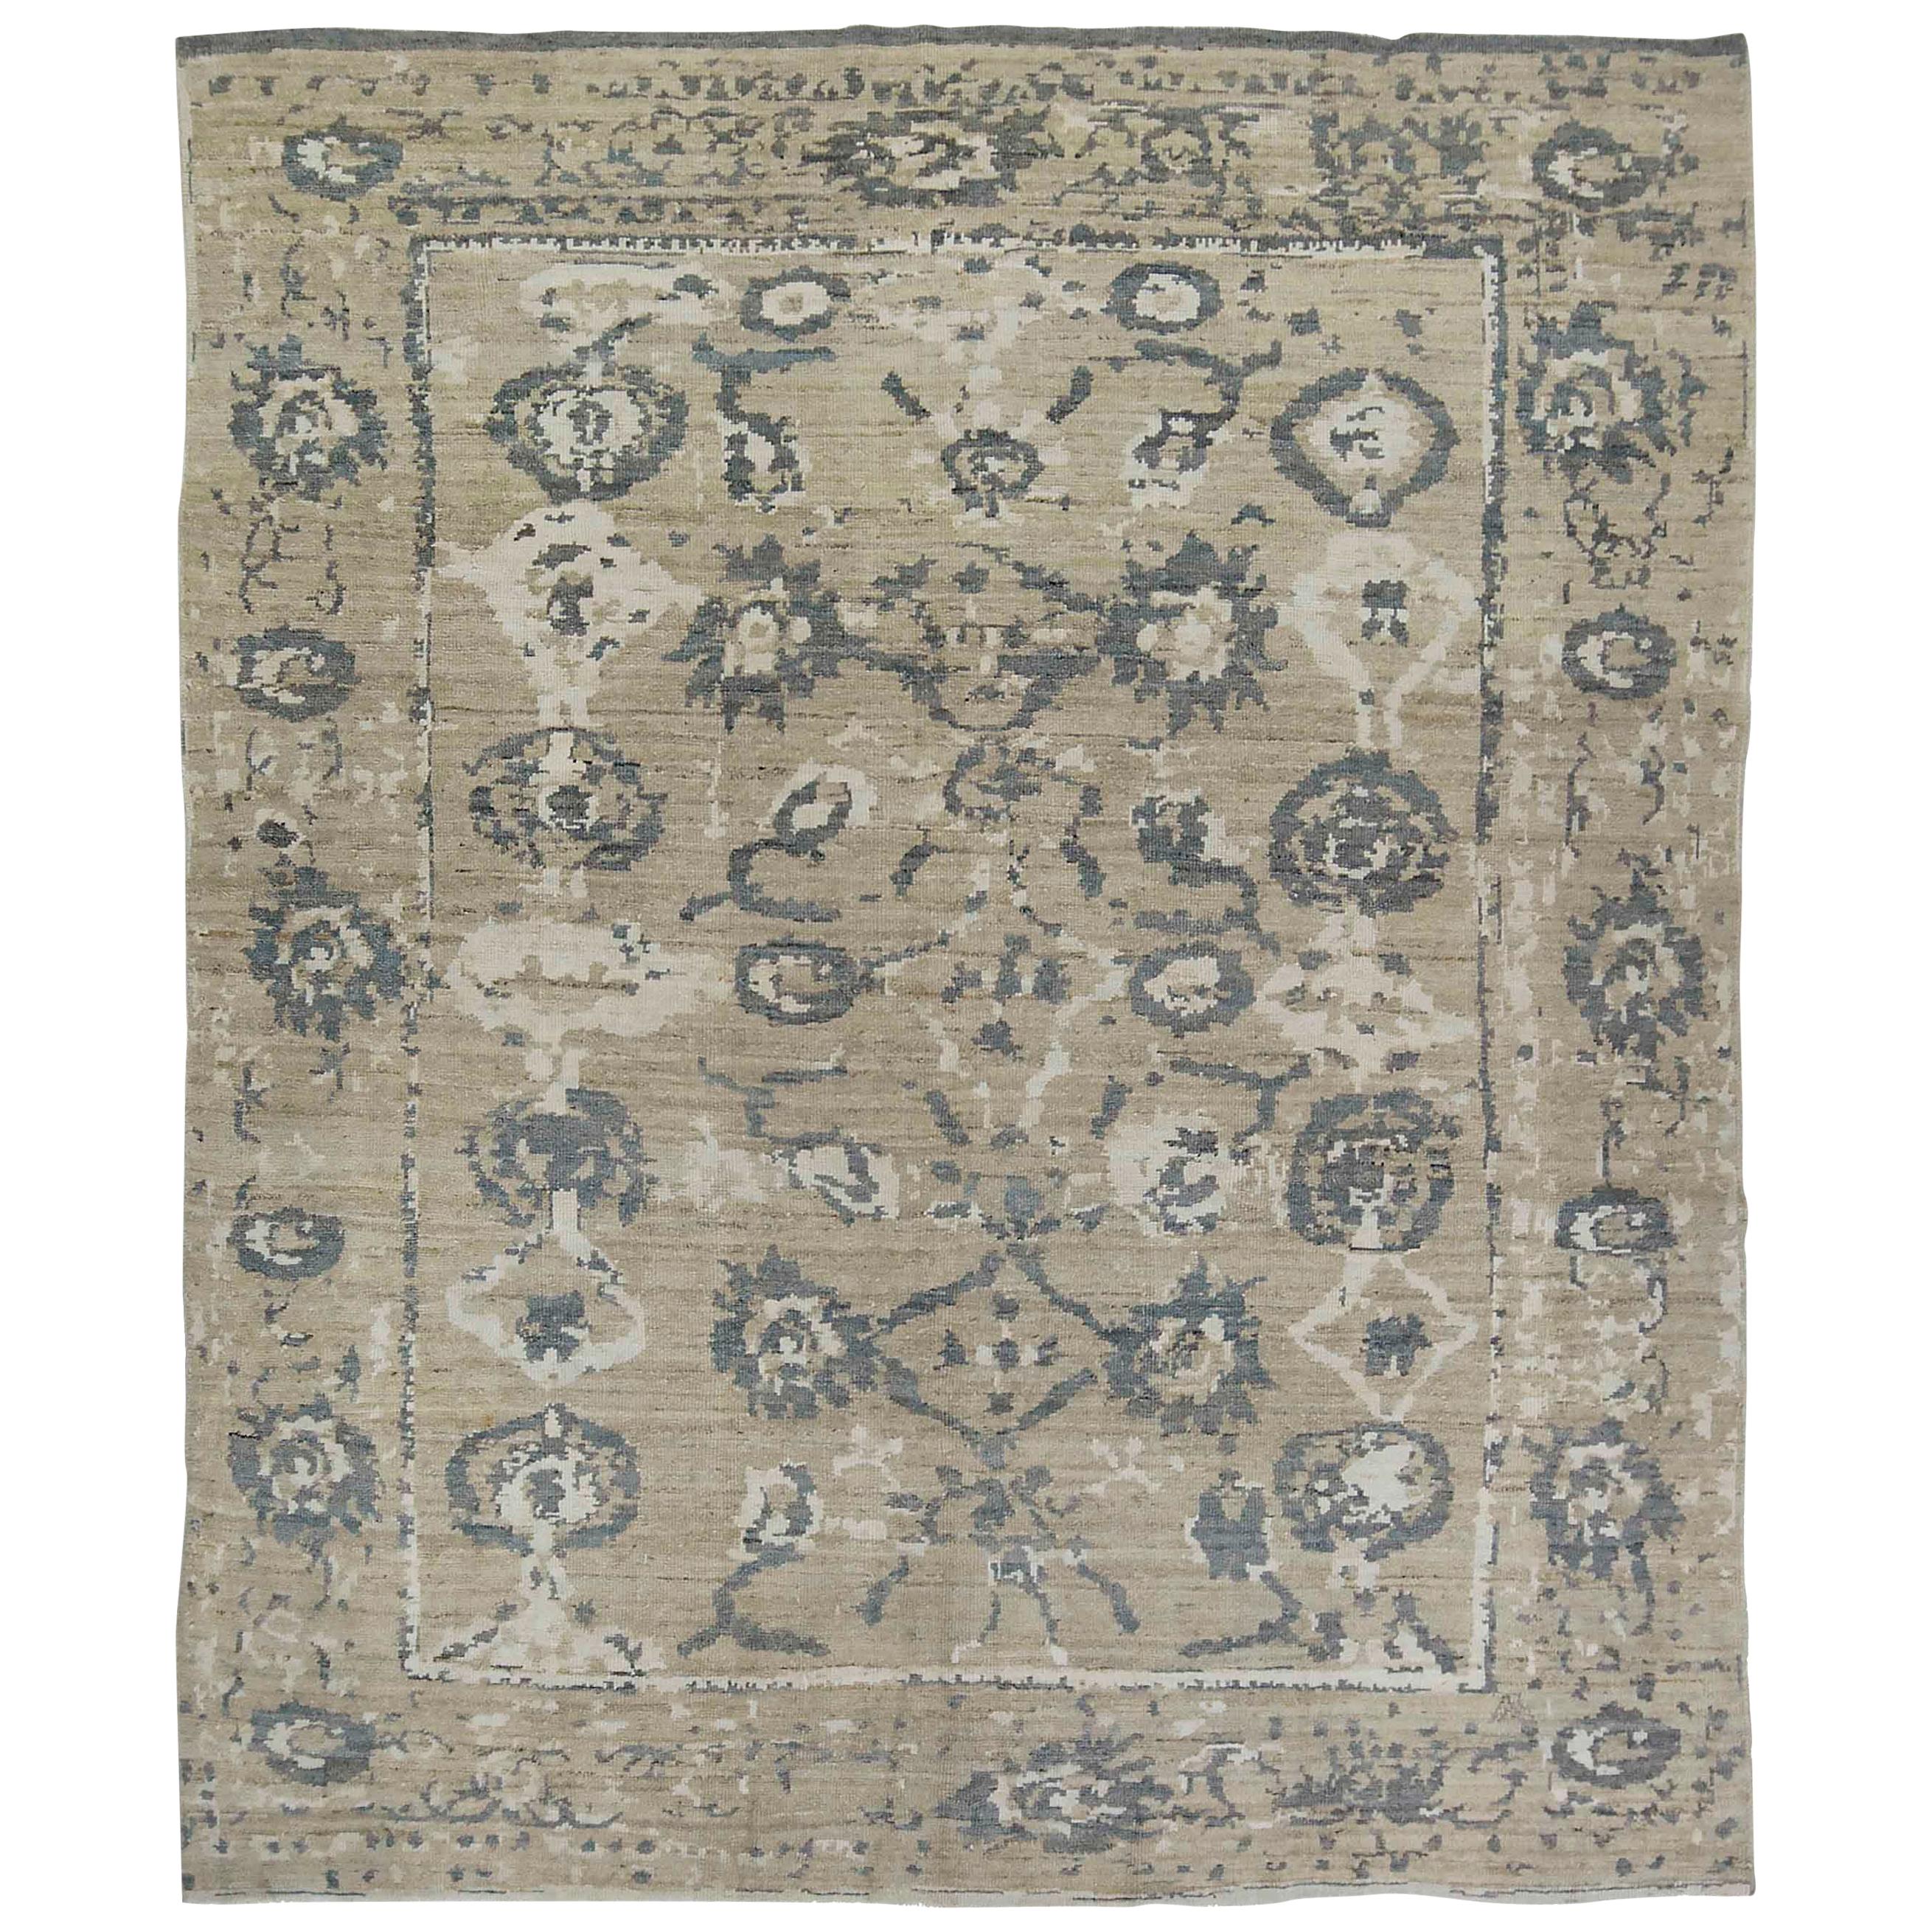 New Turkish Oushak Rug with Gray and White Floral Patterns on Beige Field For Sale